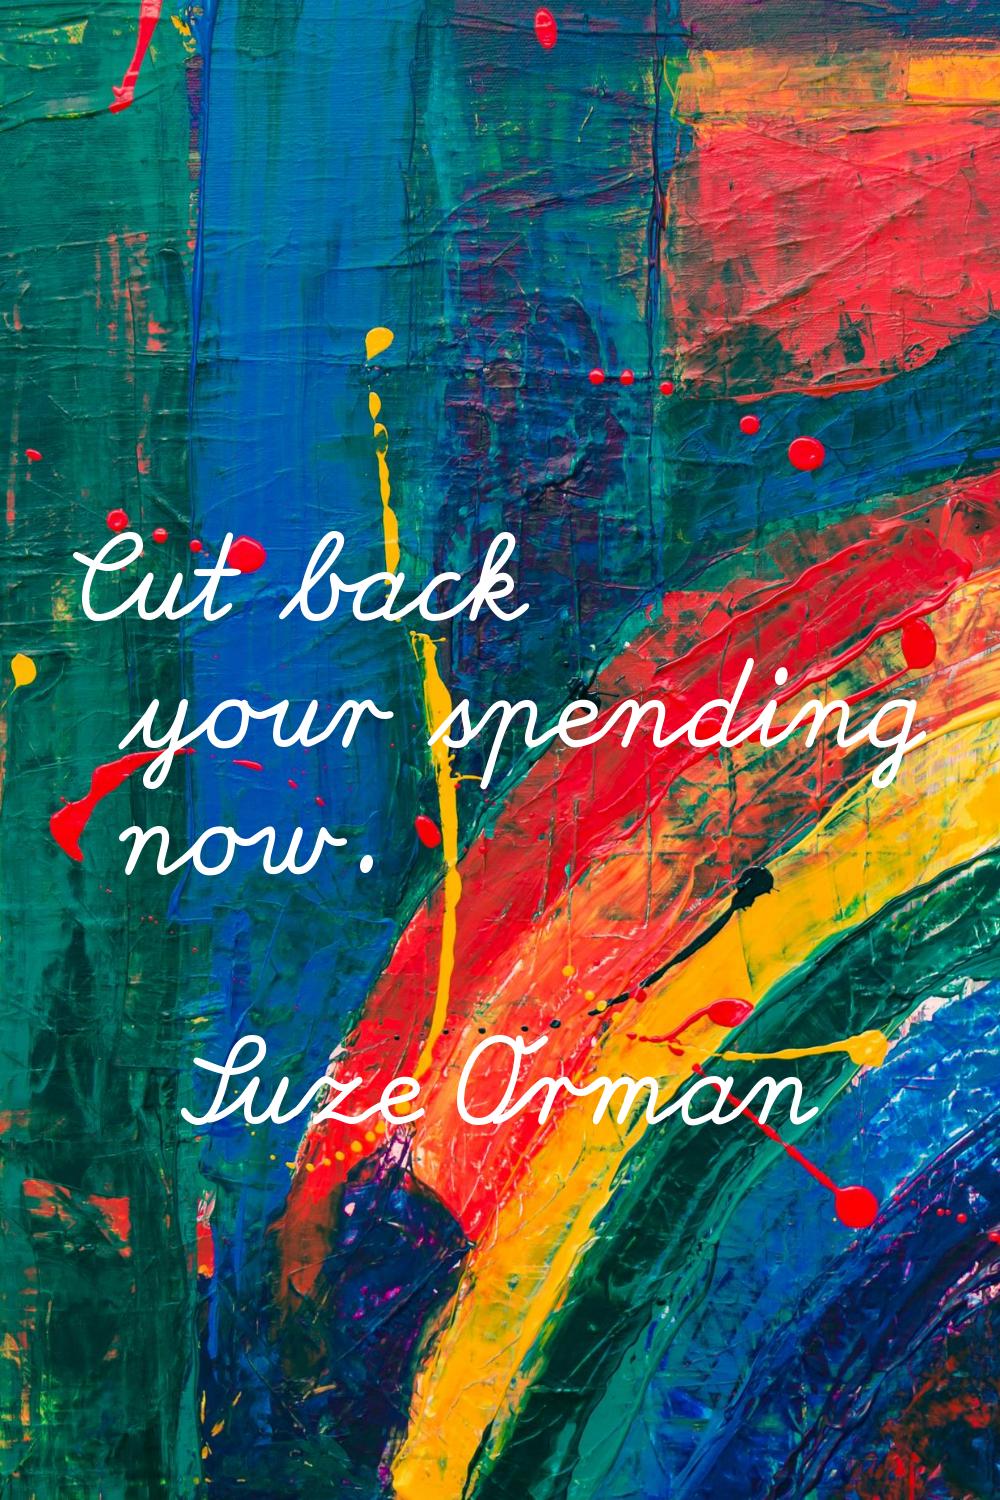 Cut back your spending now.